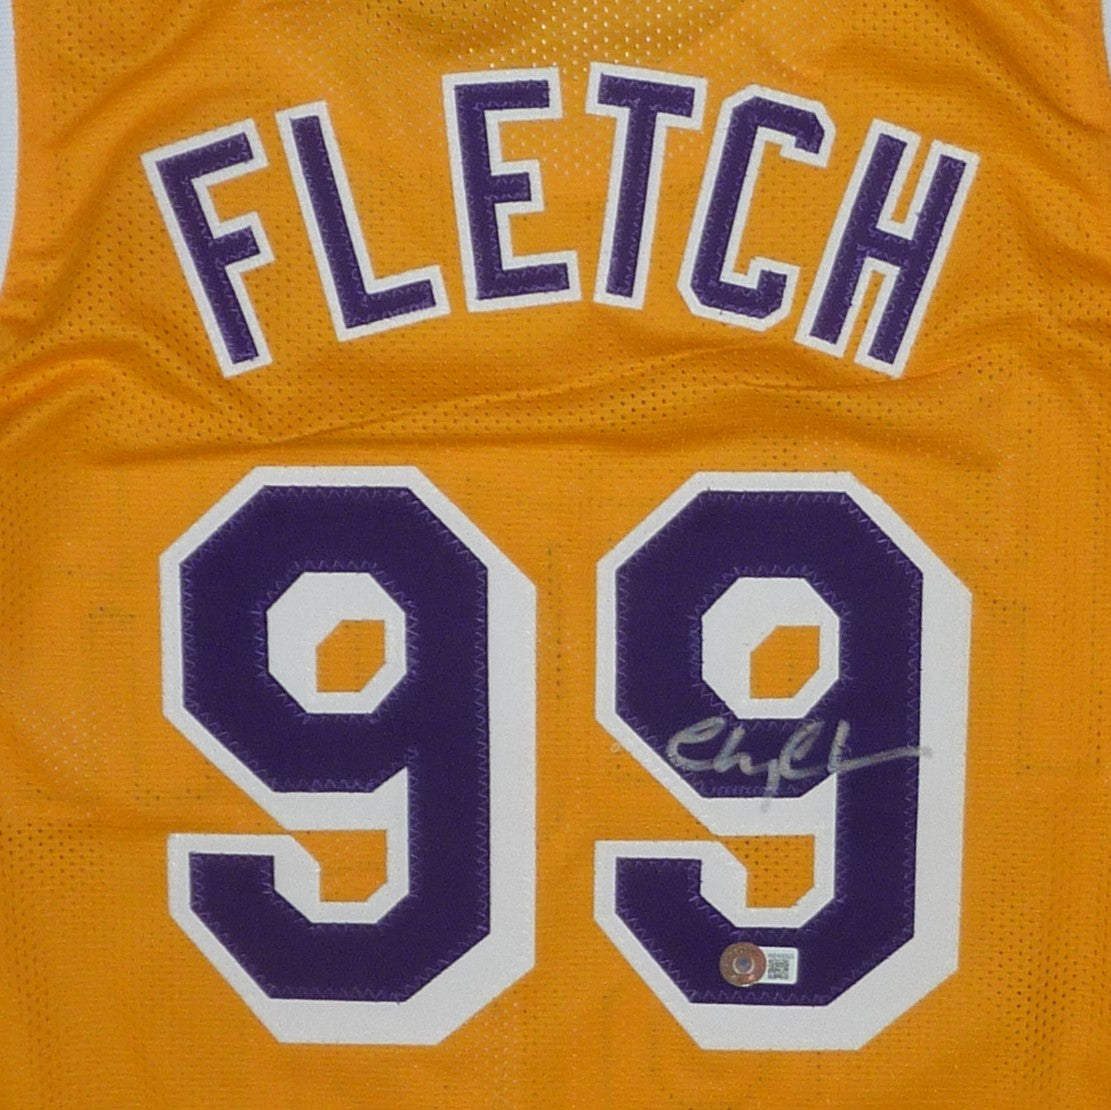 Chevy Chase Autographed Fletch (Yellow #99) Custom Basketball Jersey - Beckett Witness